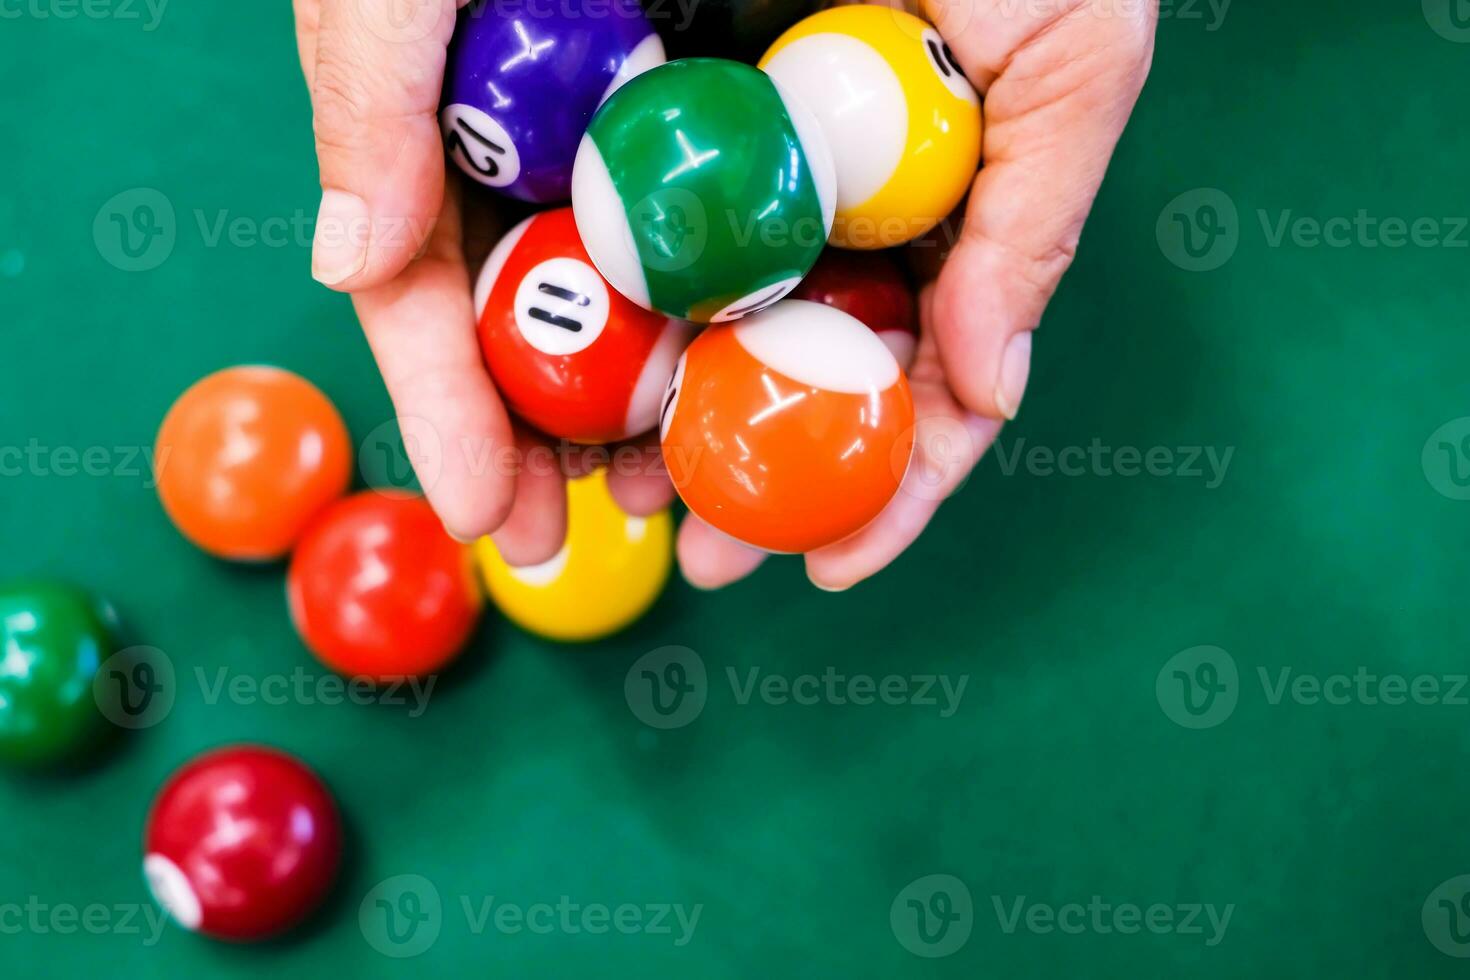 Hand holding colorful billiard ball sphere on green flannel on snooker table, snooker is photo